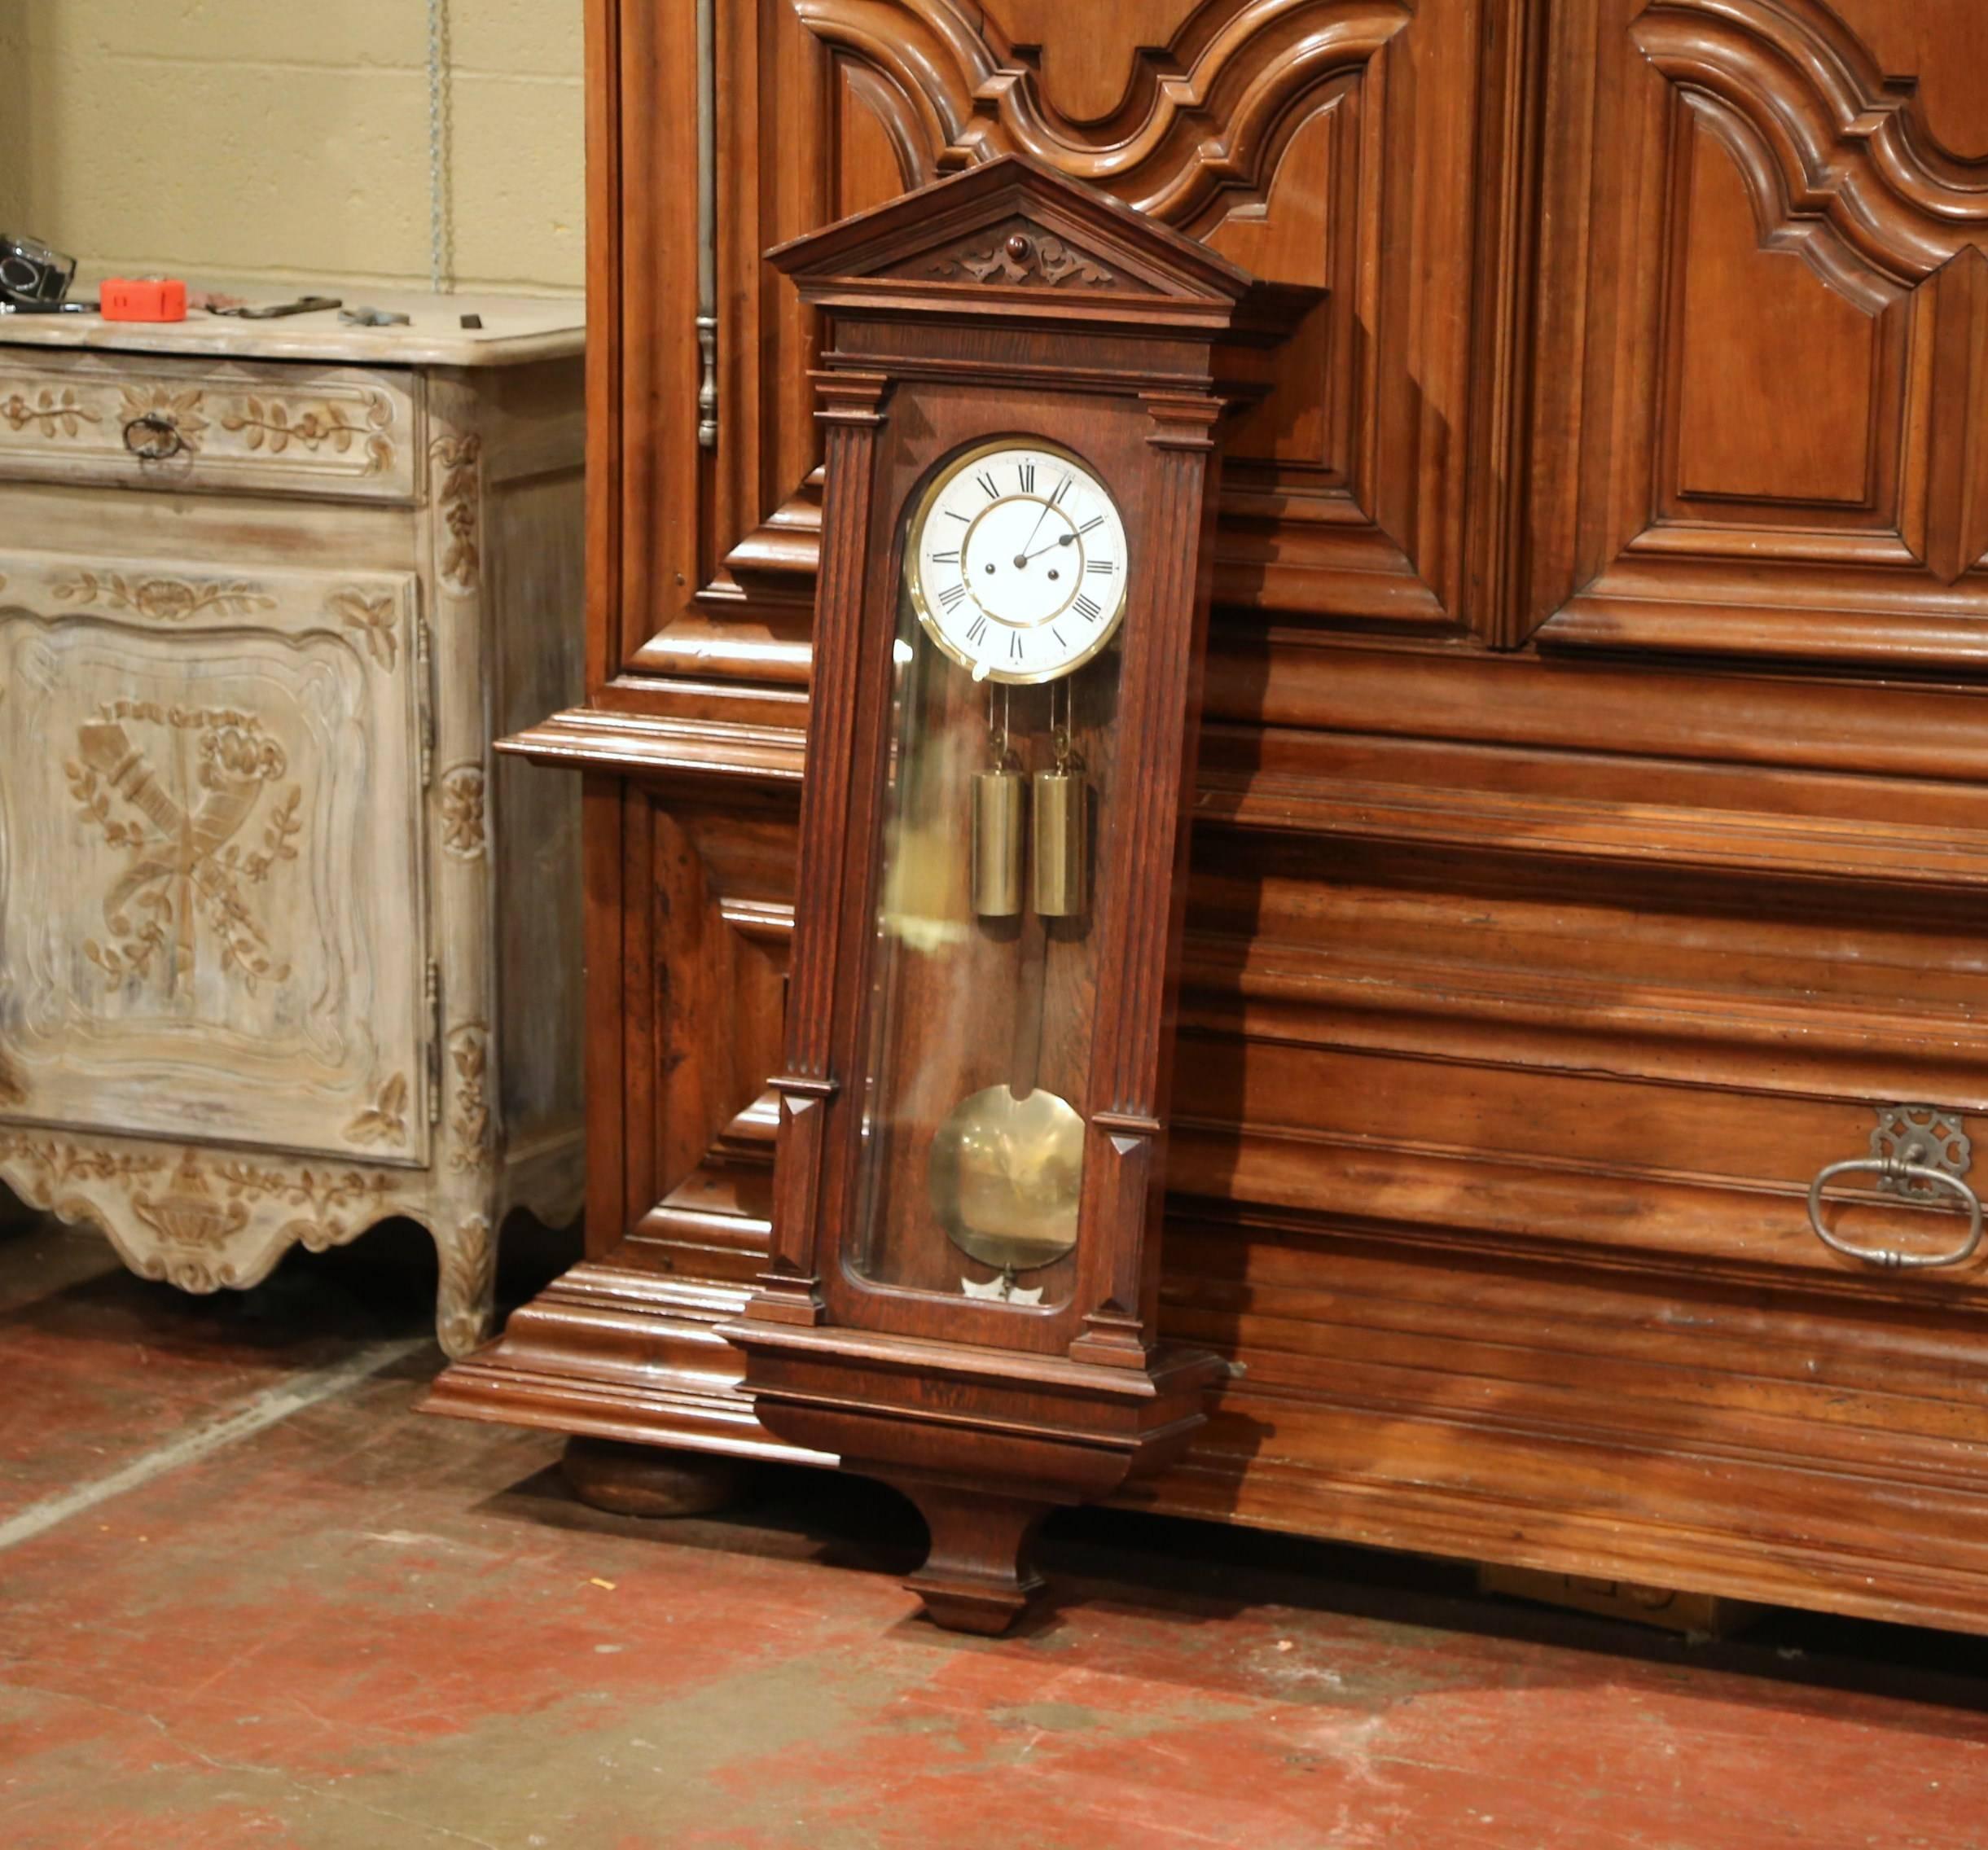 This tall wall hanging clock was crafted in Germany, circa 1870. Made in oak, the Lenzkirch clock features hand-carved decoration at the pediment and sits on an attached bracket at the bottom. The piece is in excellent condition with a rich walnut